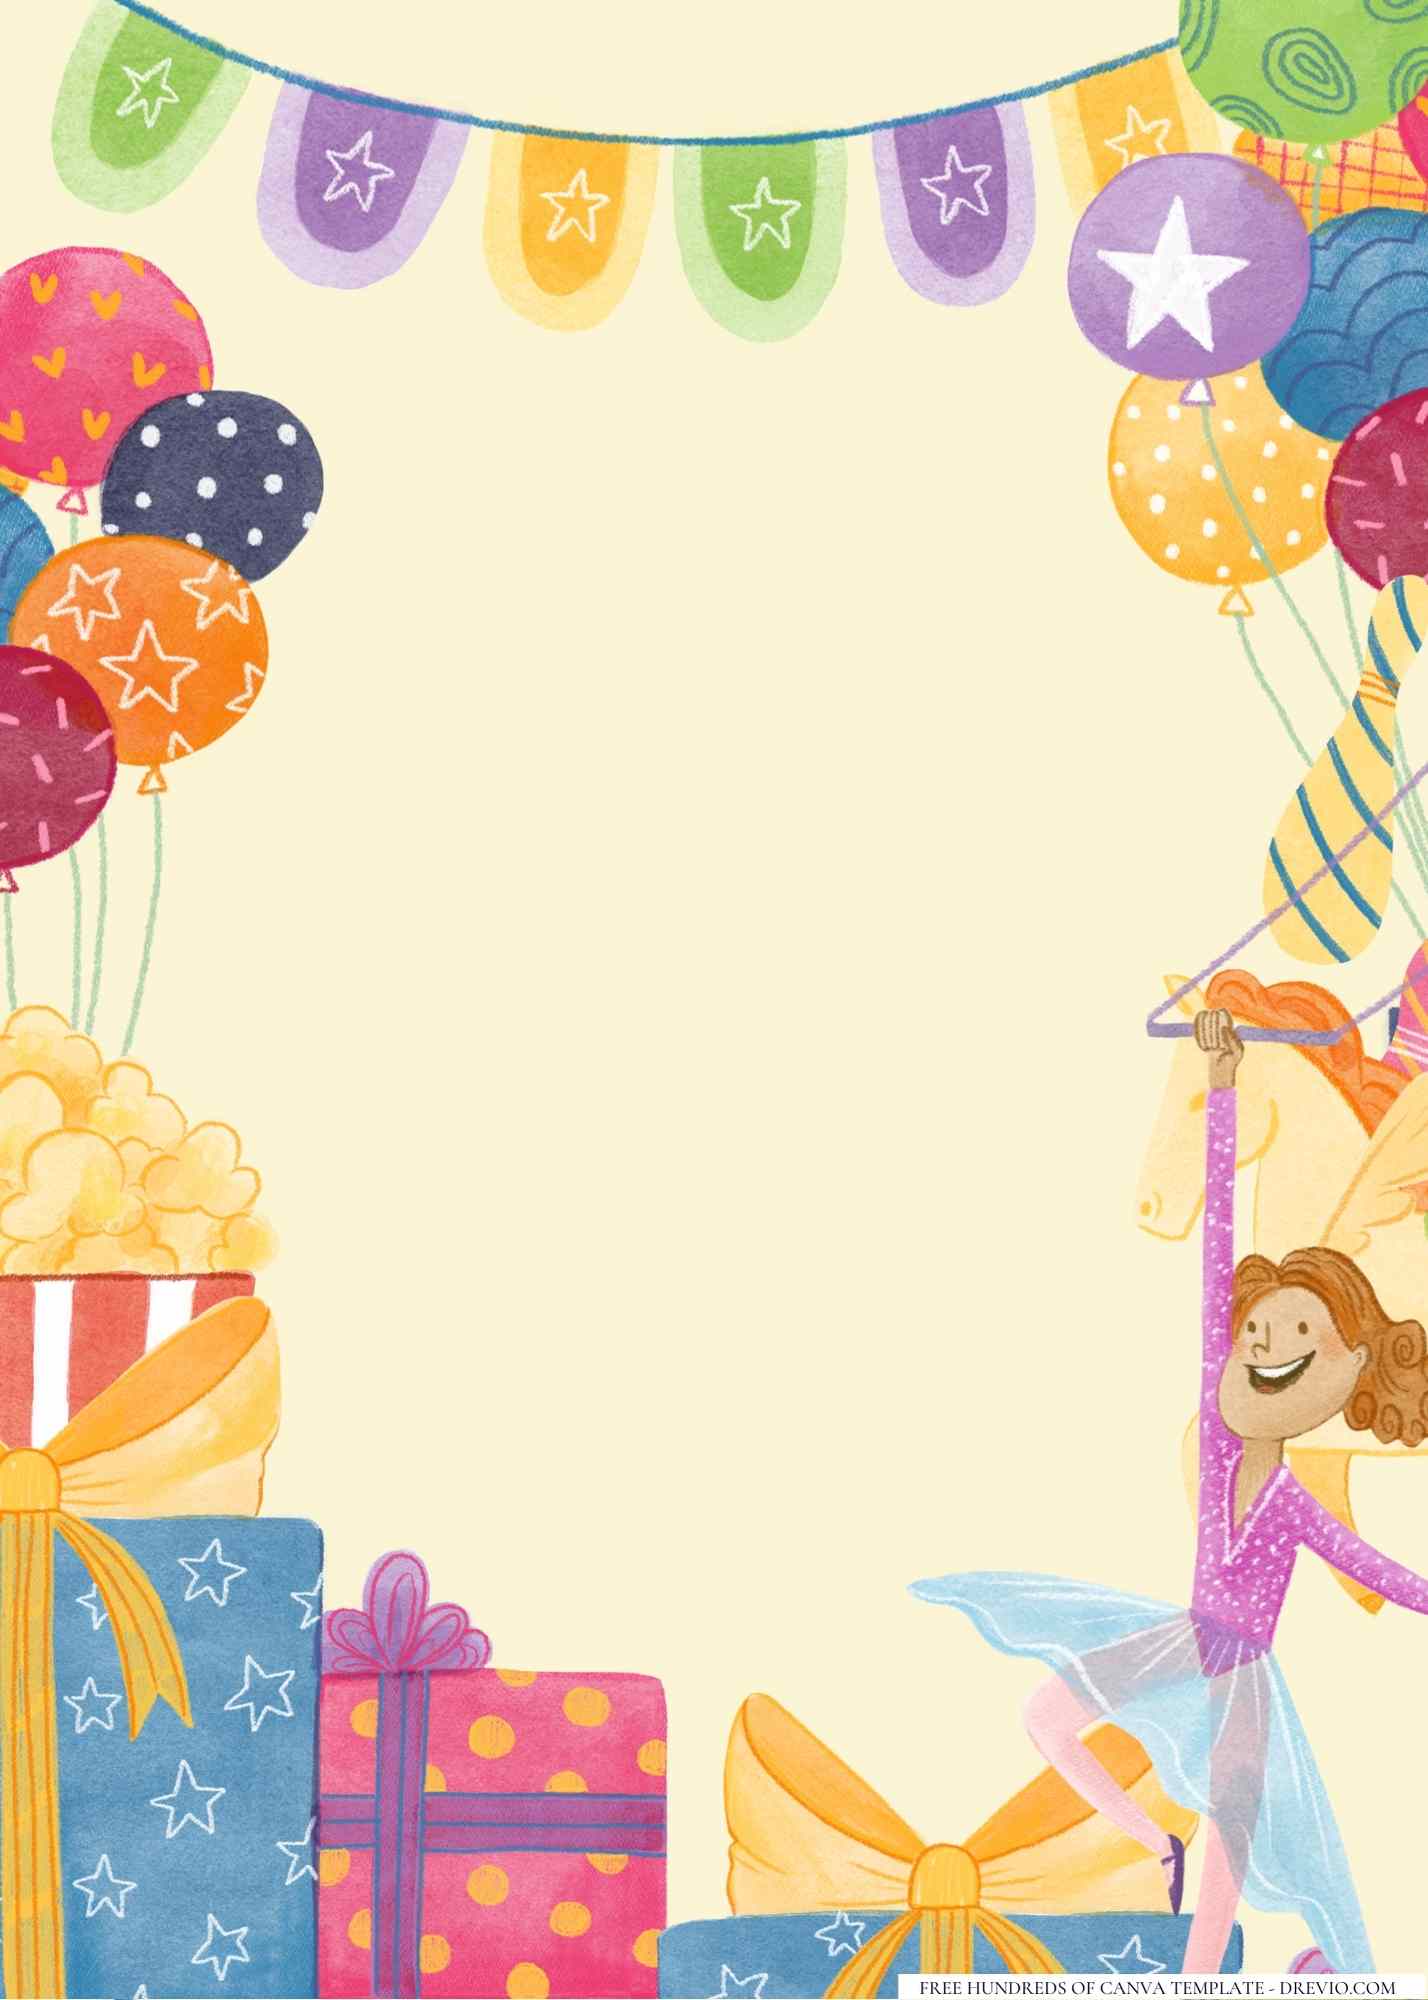 free-circus-party-canva-templates-12-download-hundreds-free